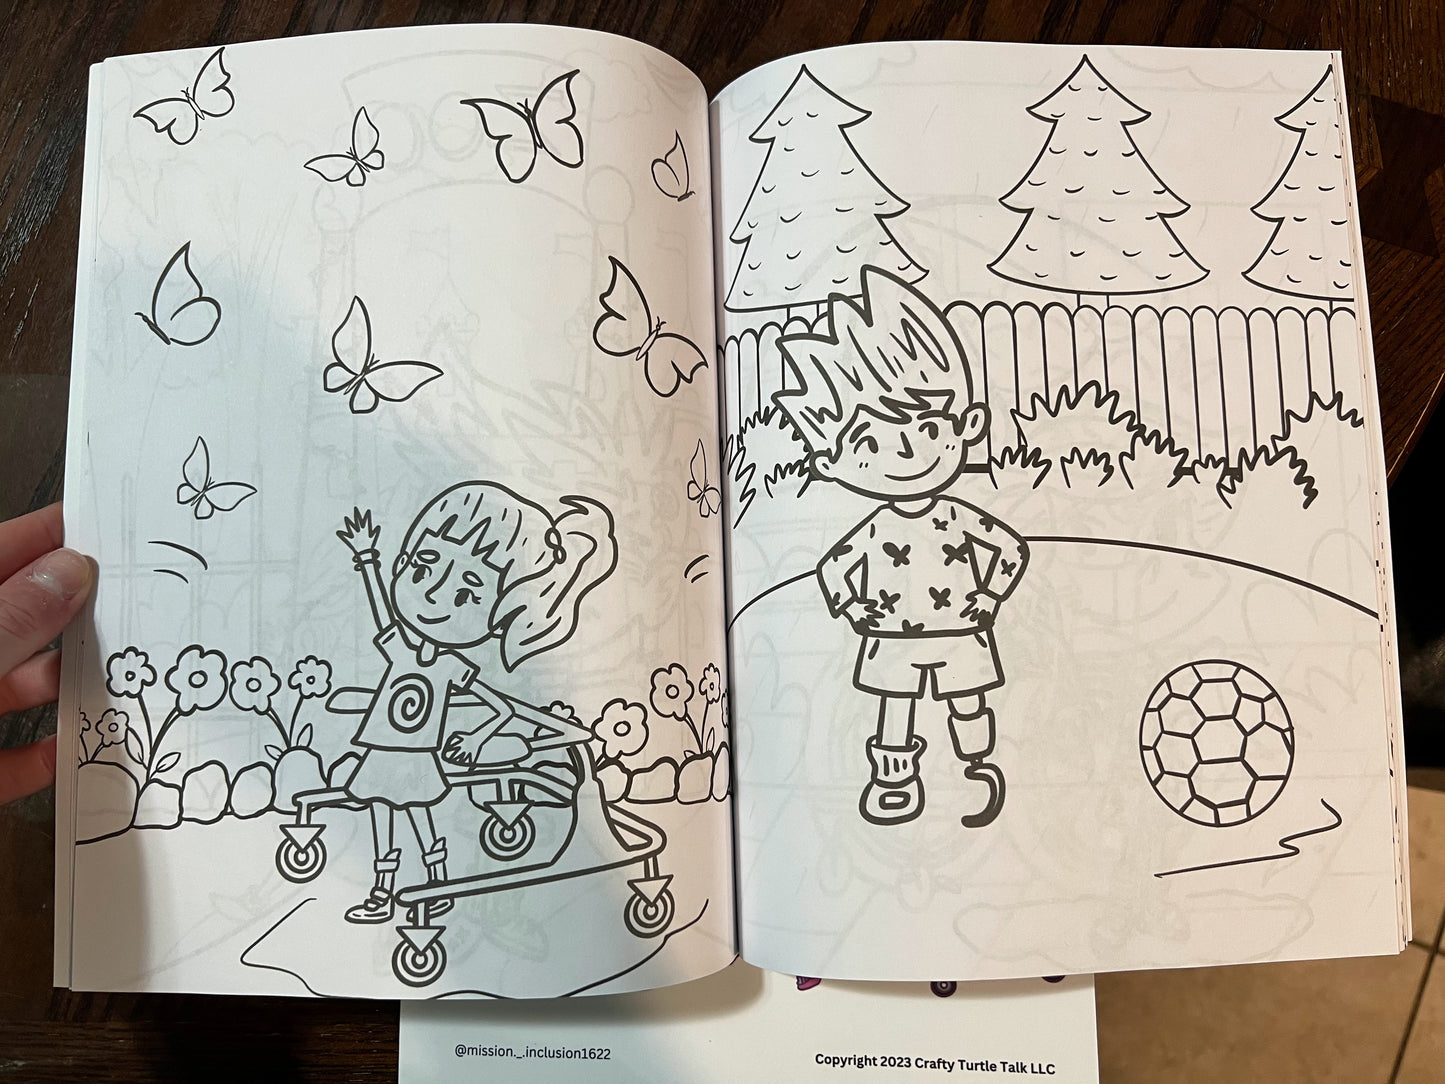 Mission: Inclusion Coloring Pages